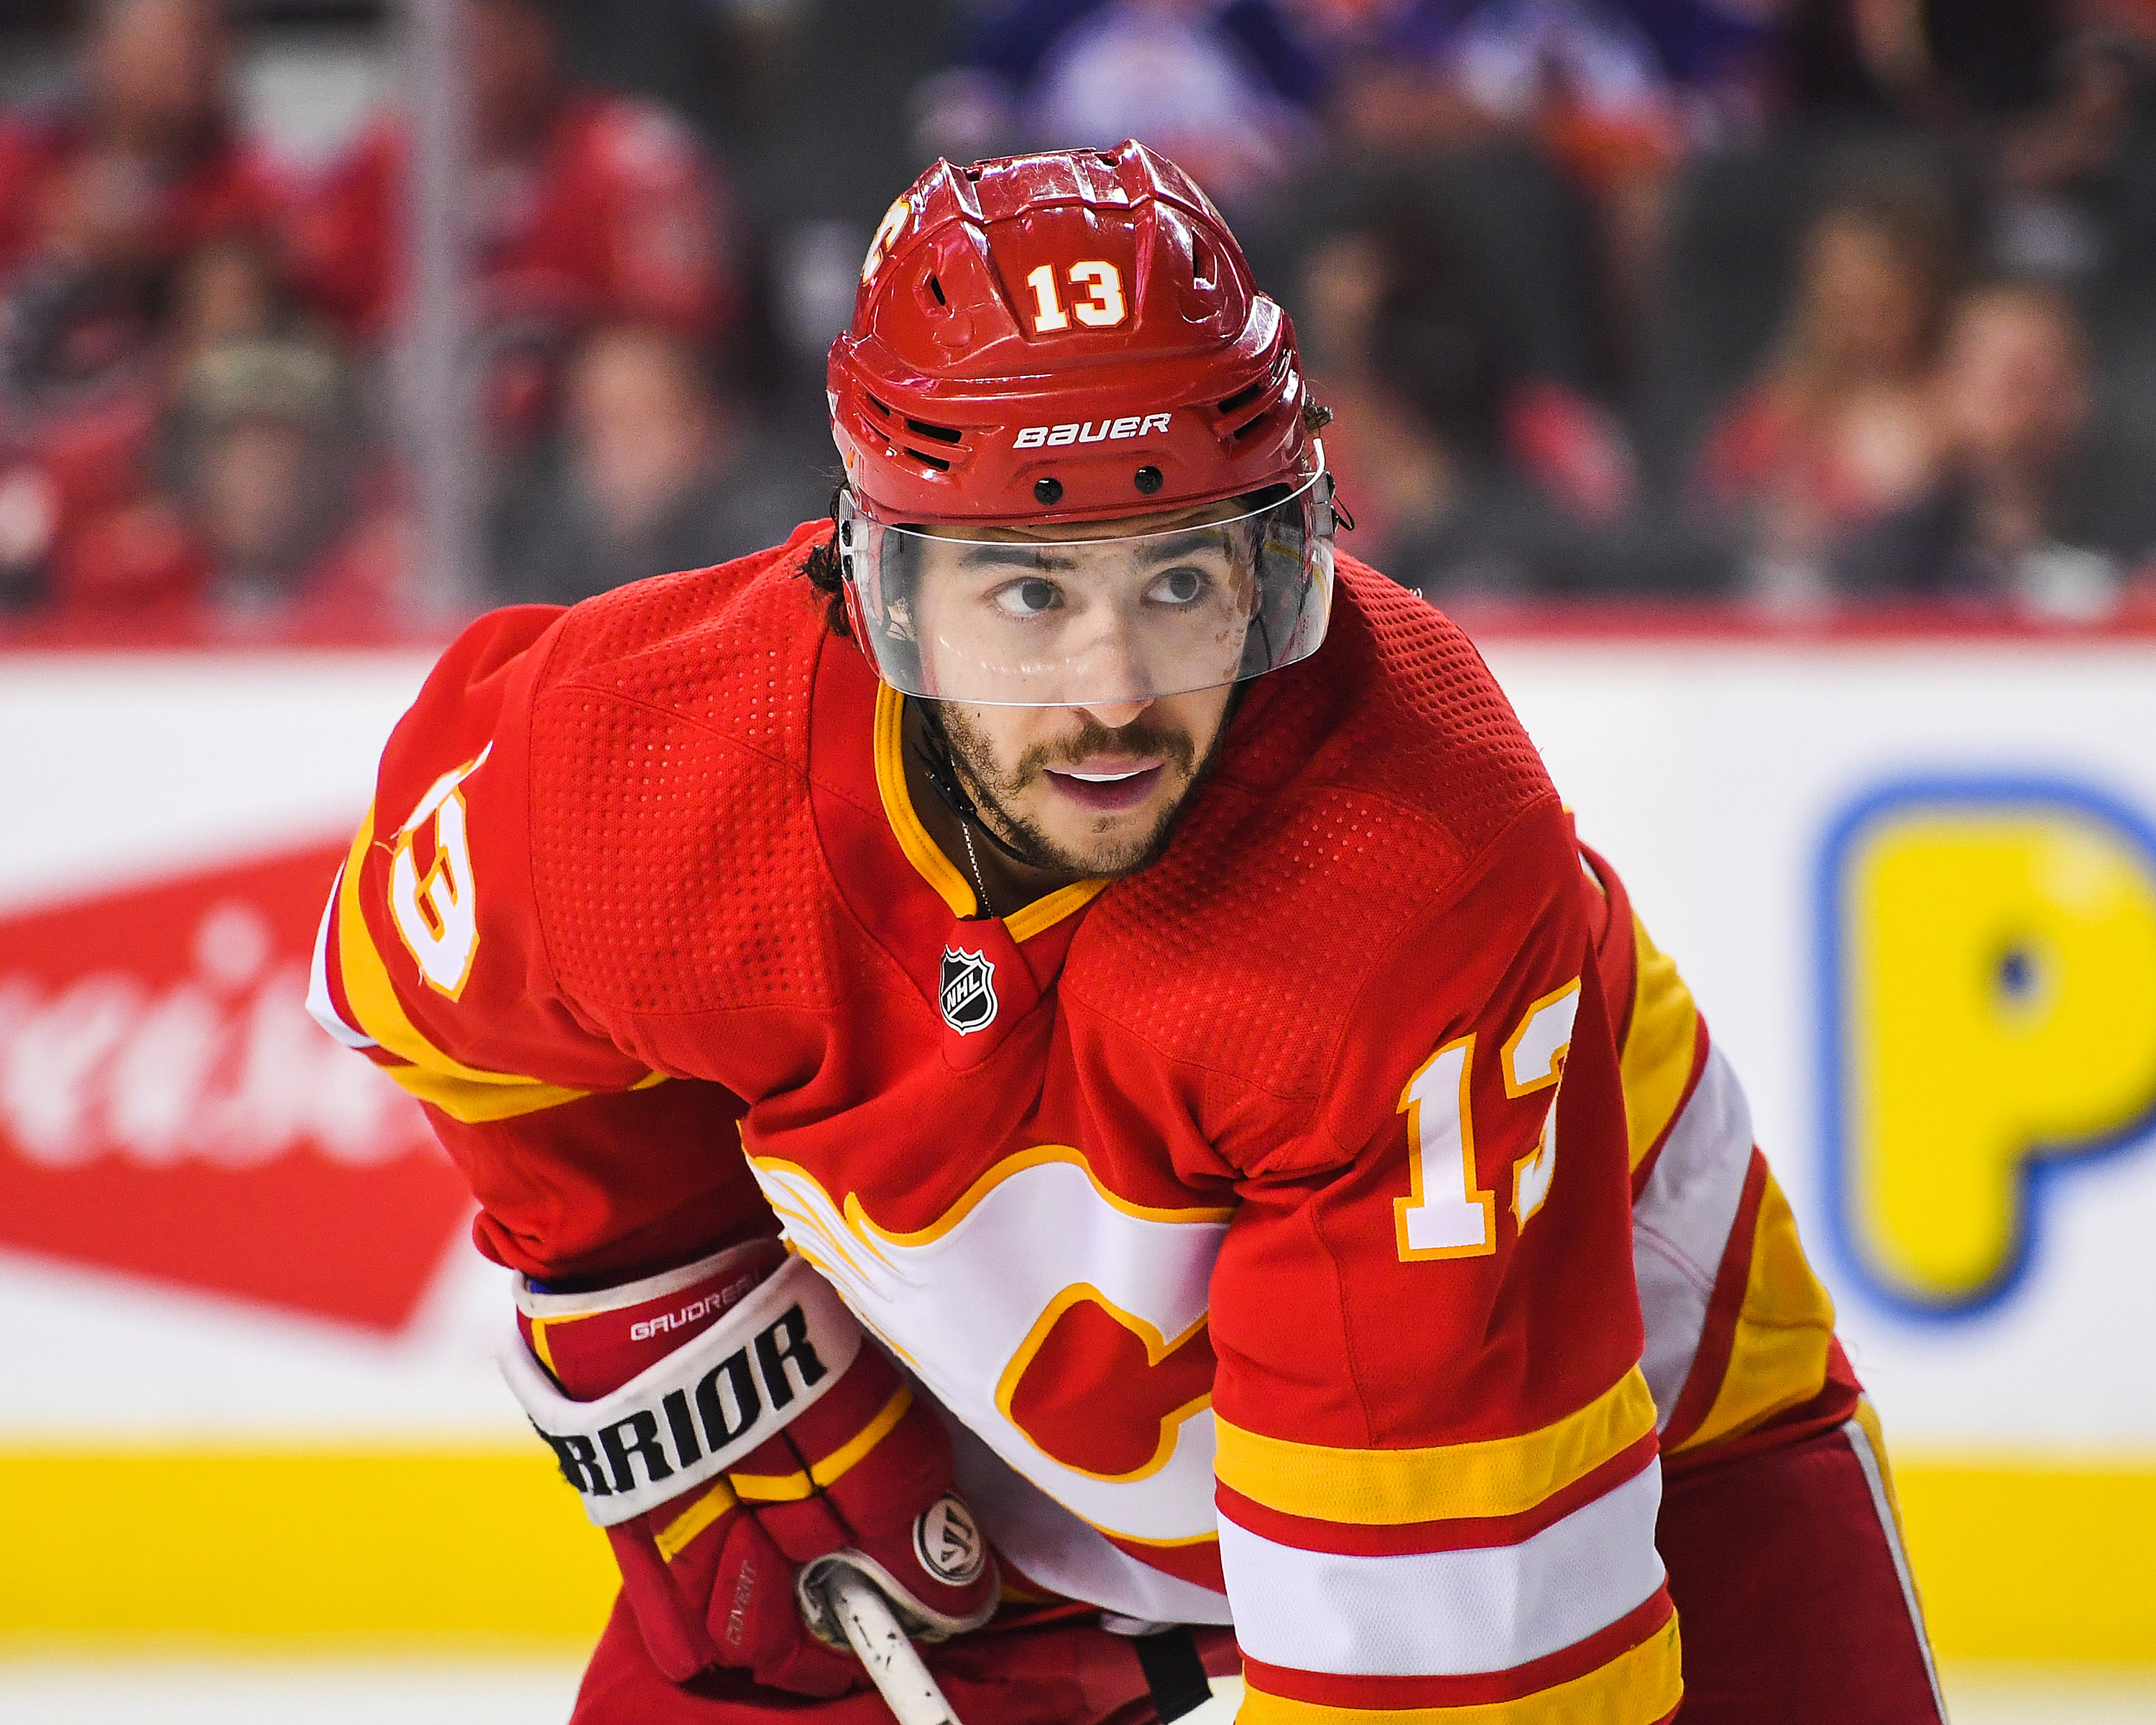 College Hockey, Inc. TV Spot, 'Nothing Compares' Featuring Johnny Gaudreau  